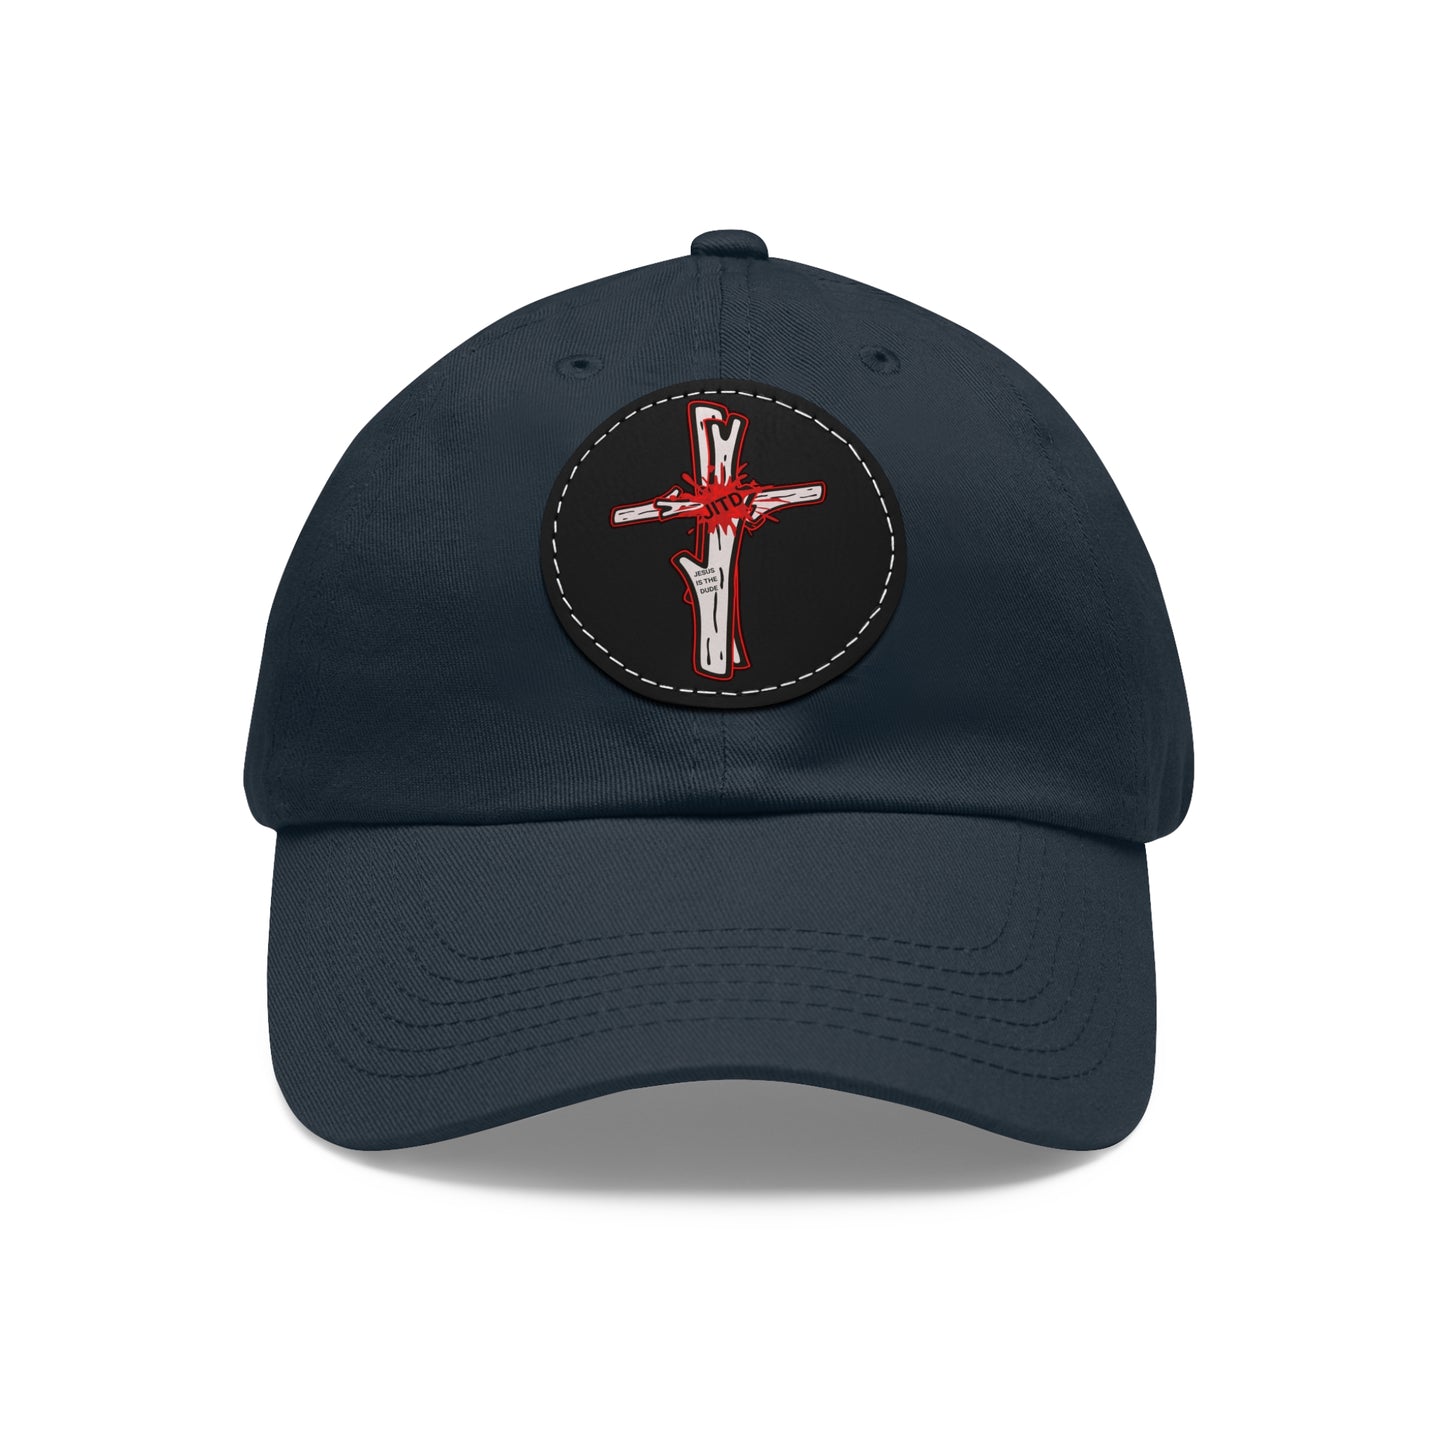 JITD LOGO CROSS HAT WITH LEATHER PATCH